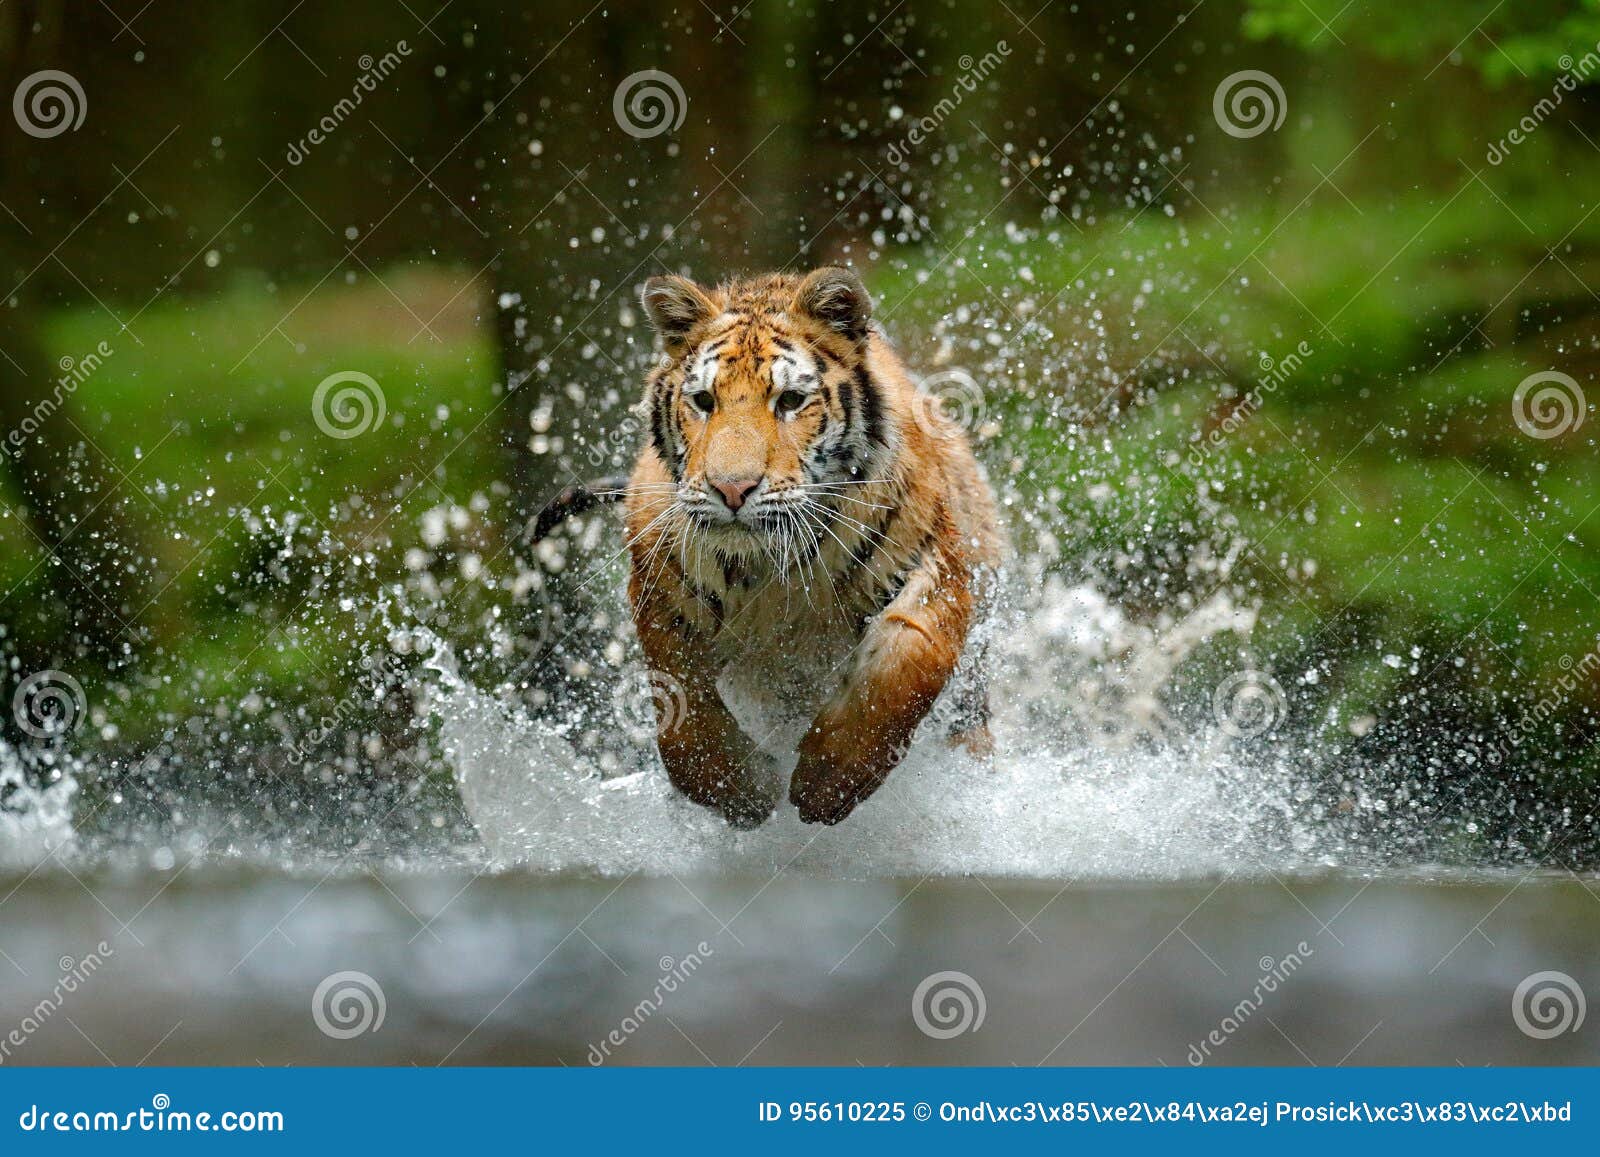 tiger running in the water. danger animal, tajga in russia. animal in the forest stream. grey stone, river droplet. tiger with spl